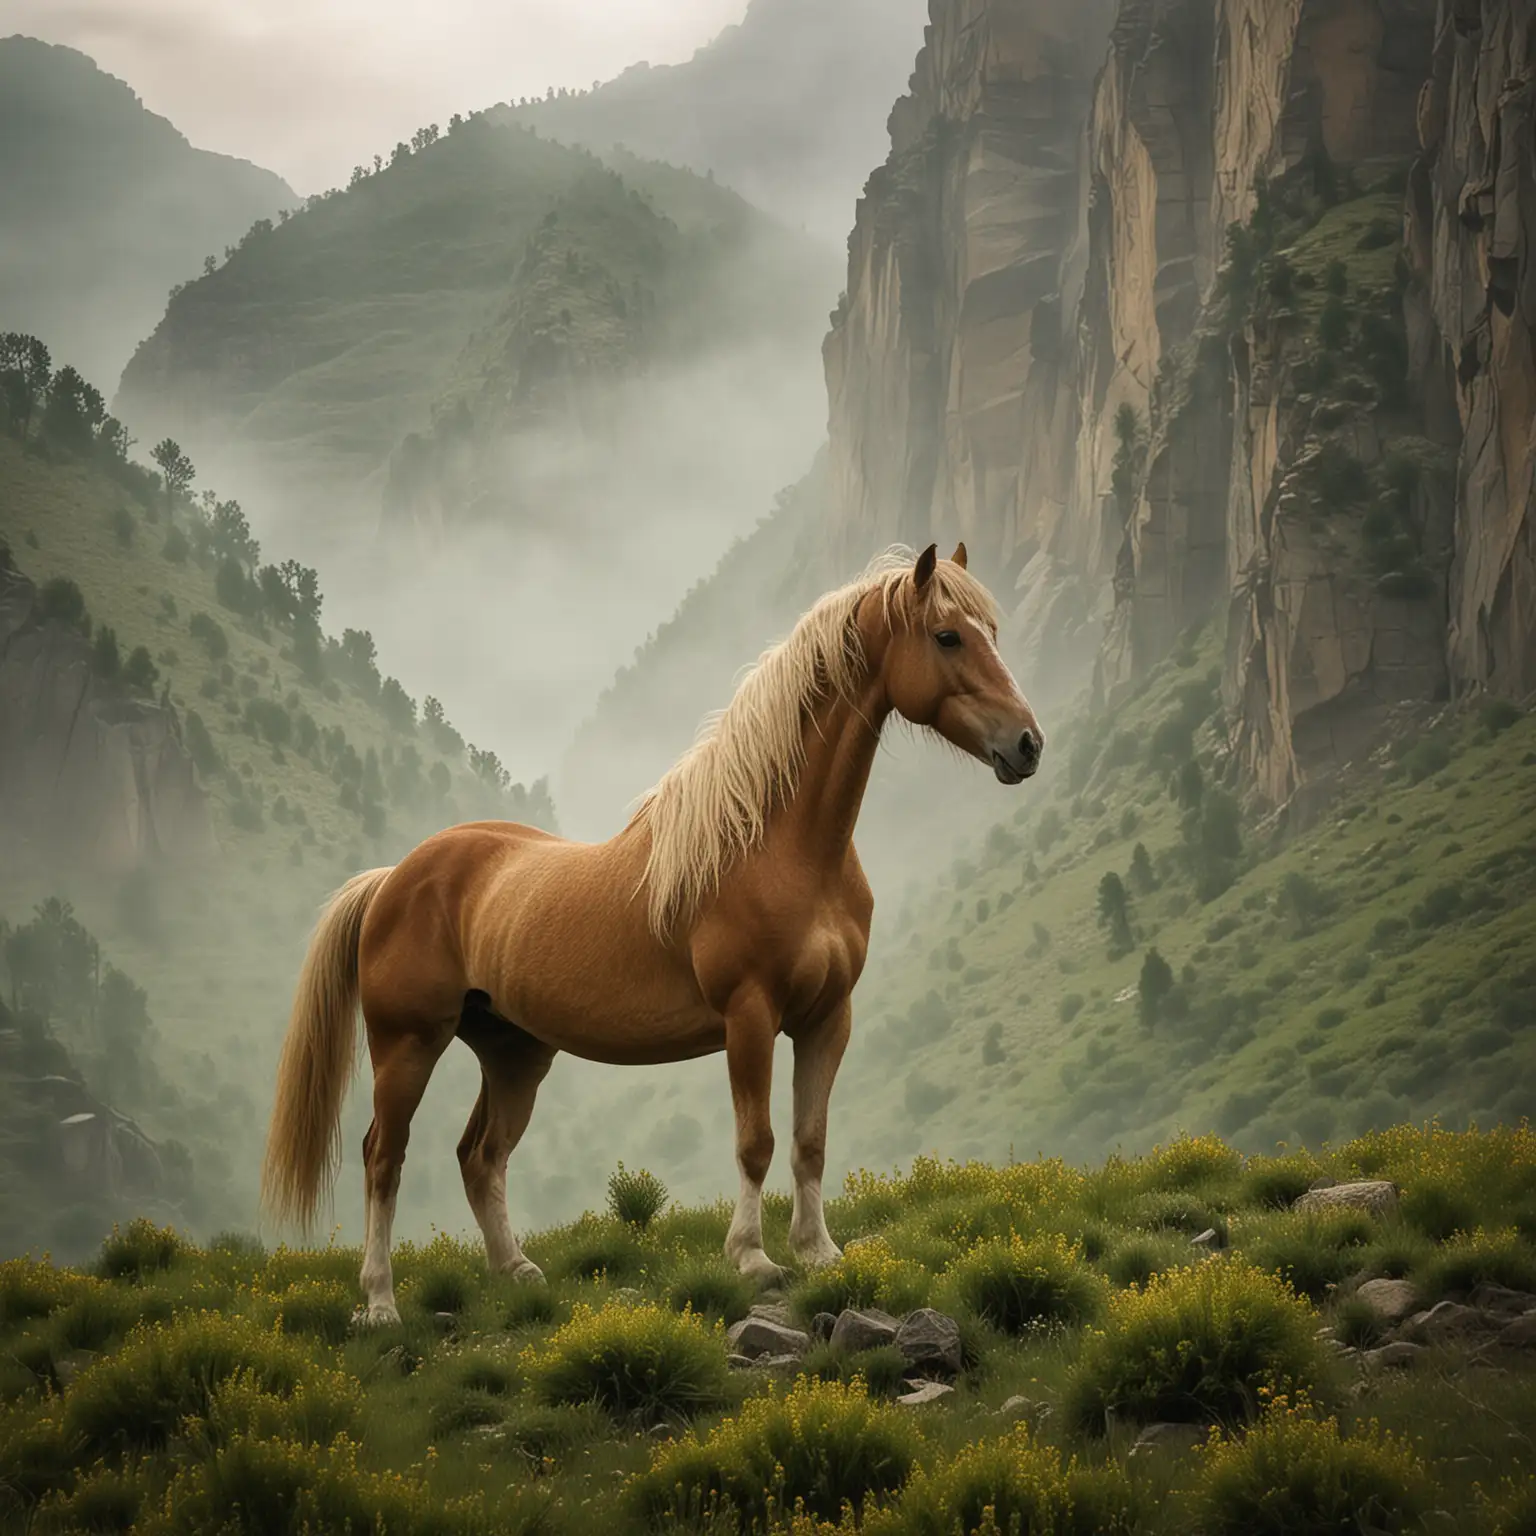 Climb the 'Mountains of Mystery' with the great and beautiful mustang horse where peaks shrouded in soft green mists hide secrets, and pure golden echoes call to those brave enough to discover the truth